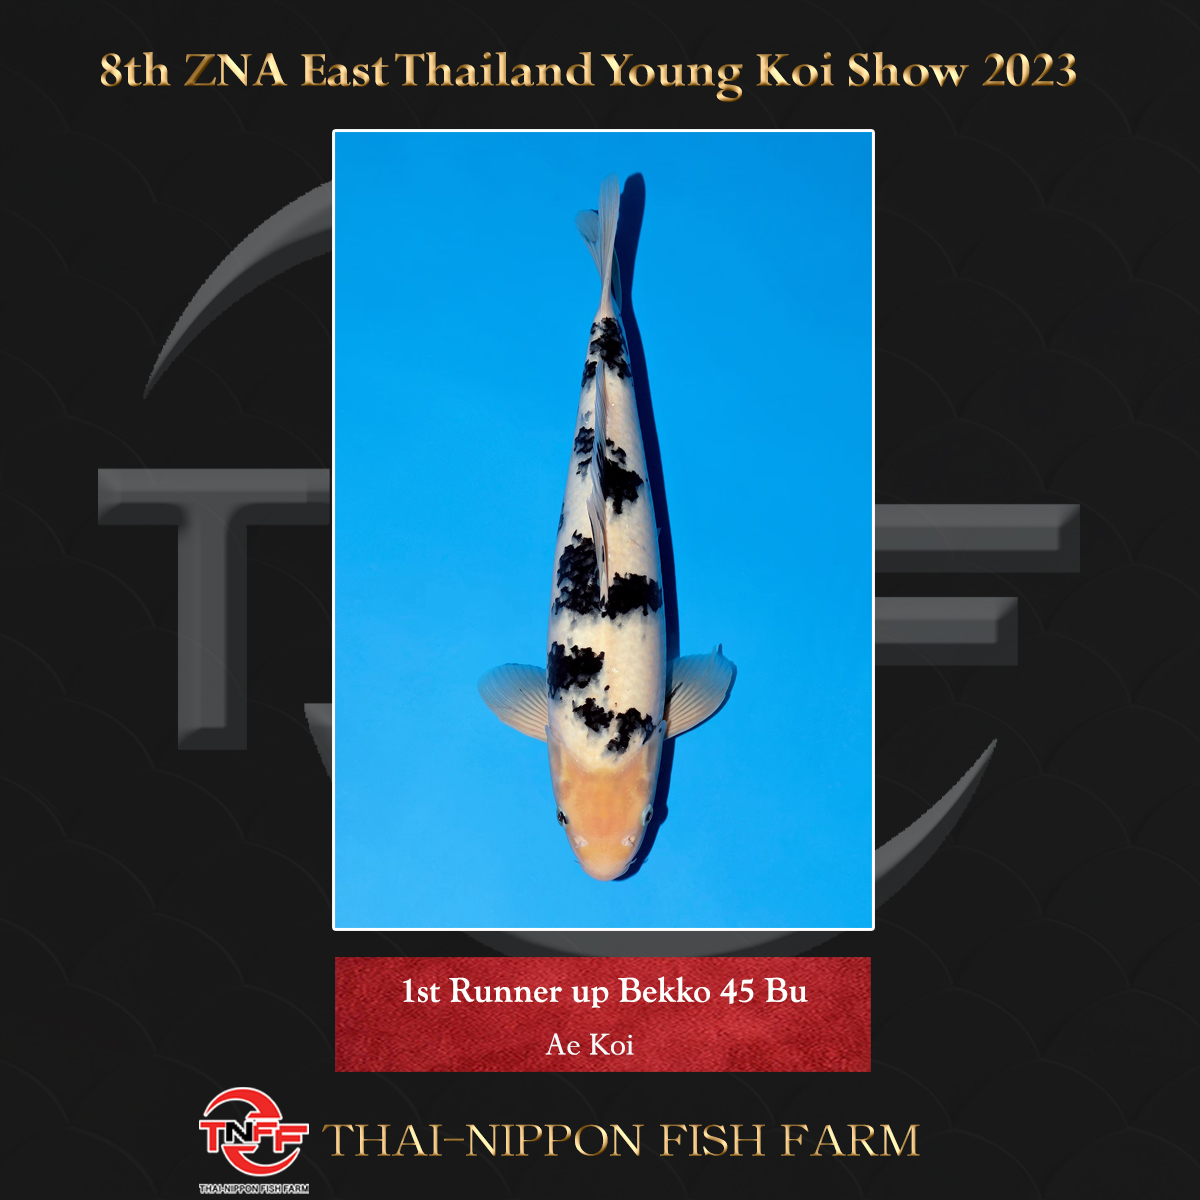 8th ZNA East Thailand Young Koi Show 2023